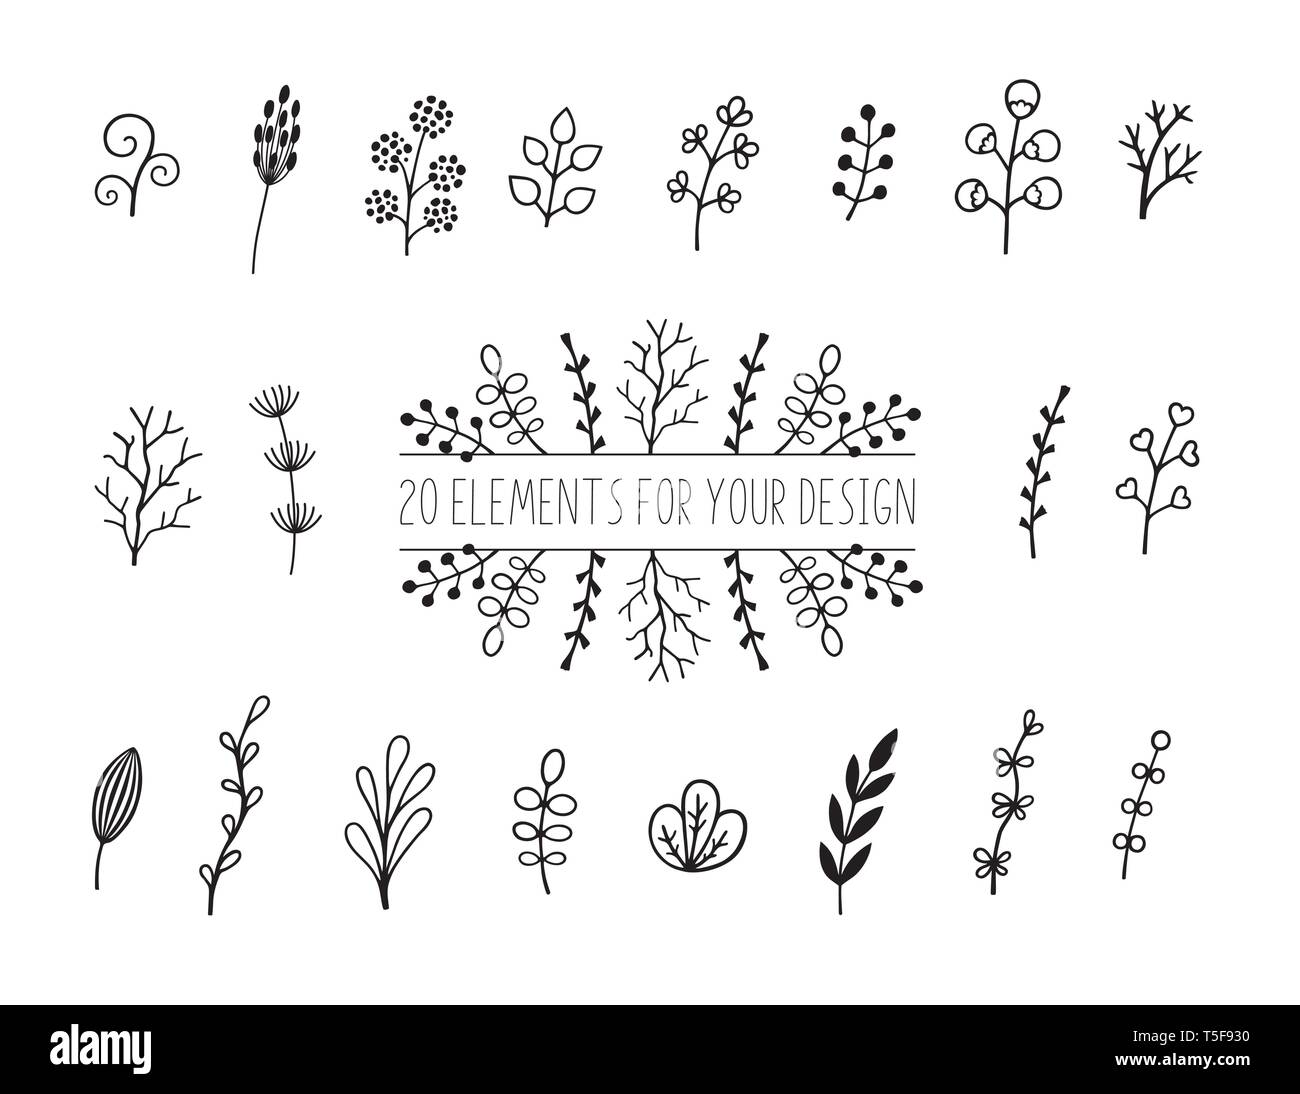 Floral and herbal set. Botanical elements for design on a white background. Sketch of branch, foliage,leaves, berries Stock Vector